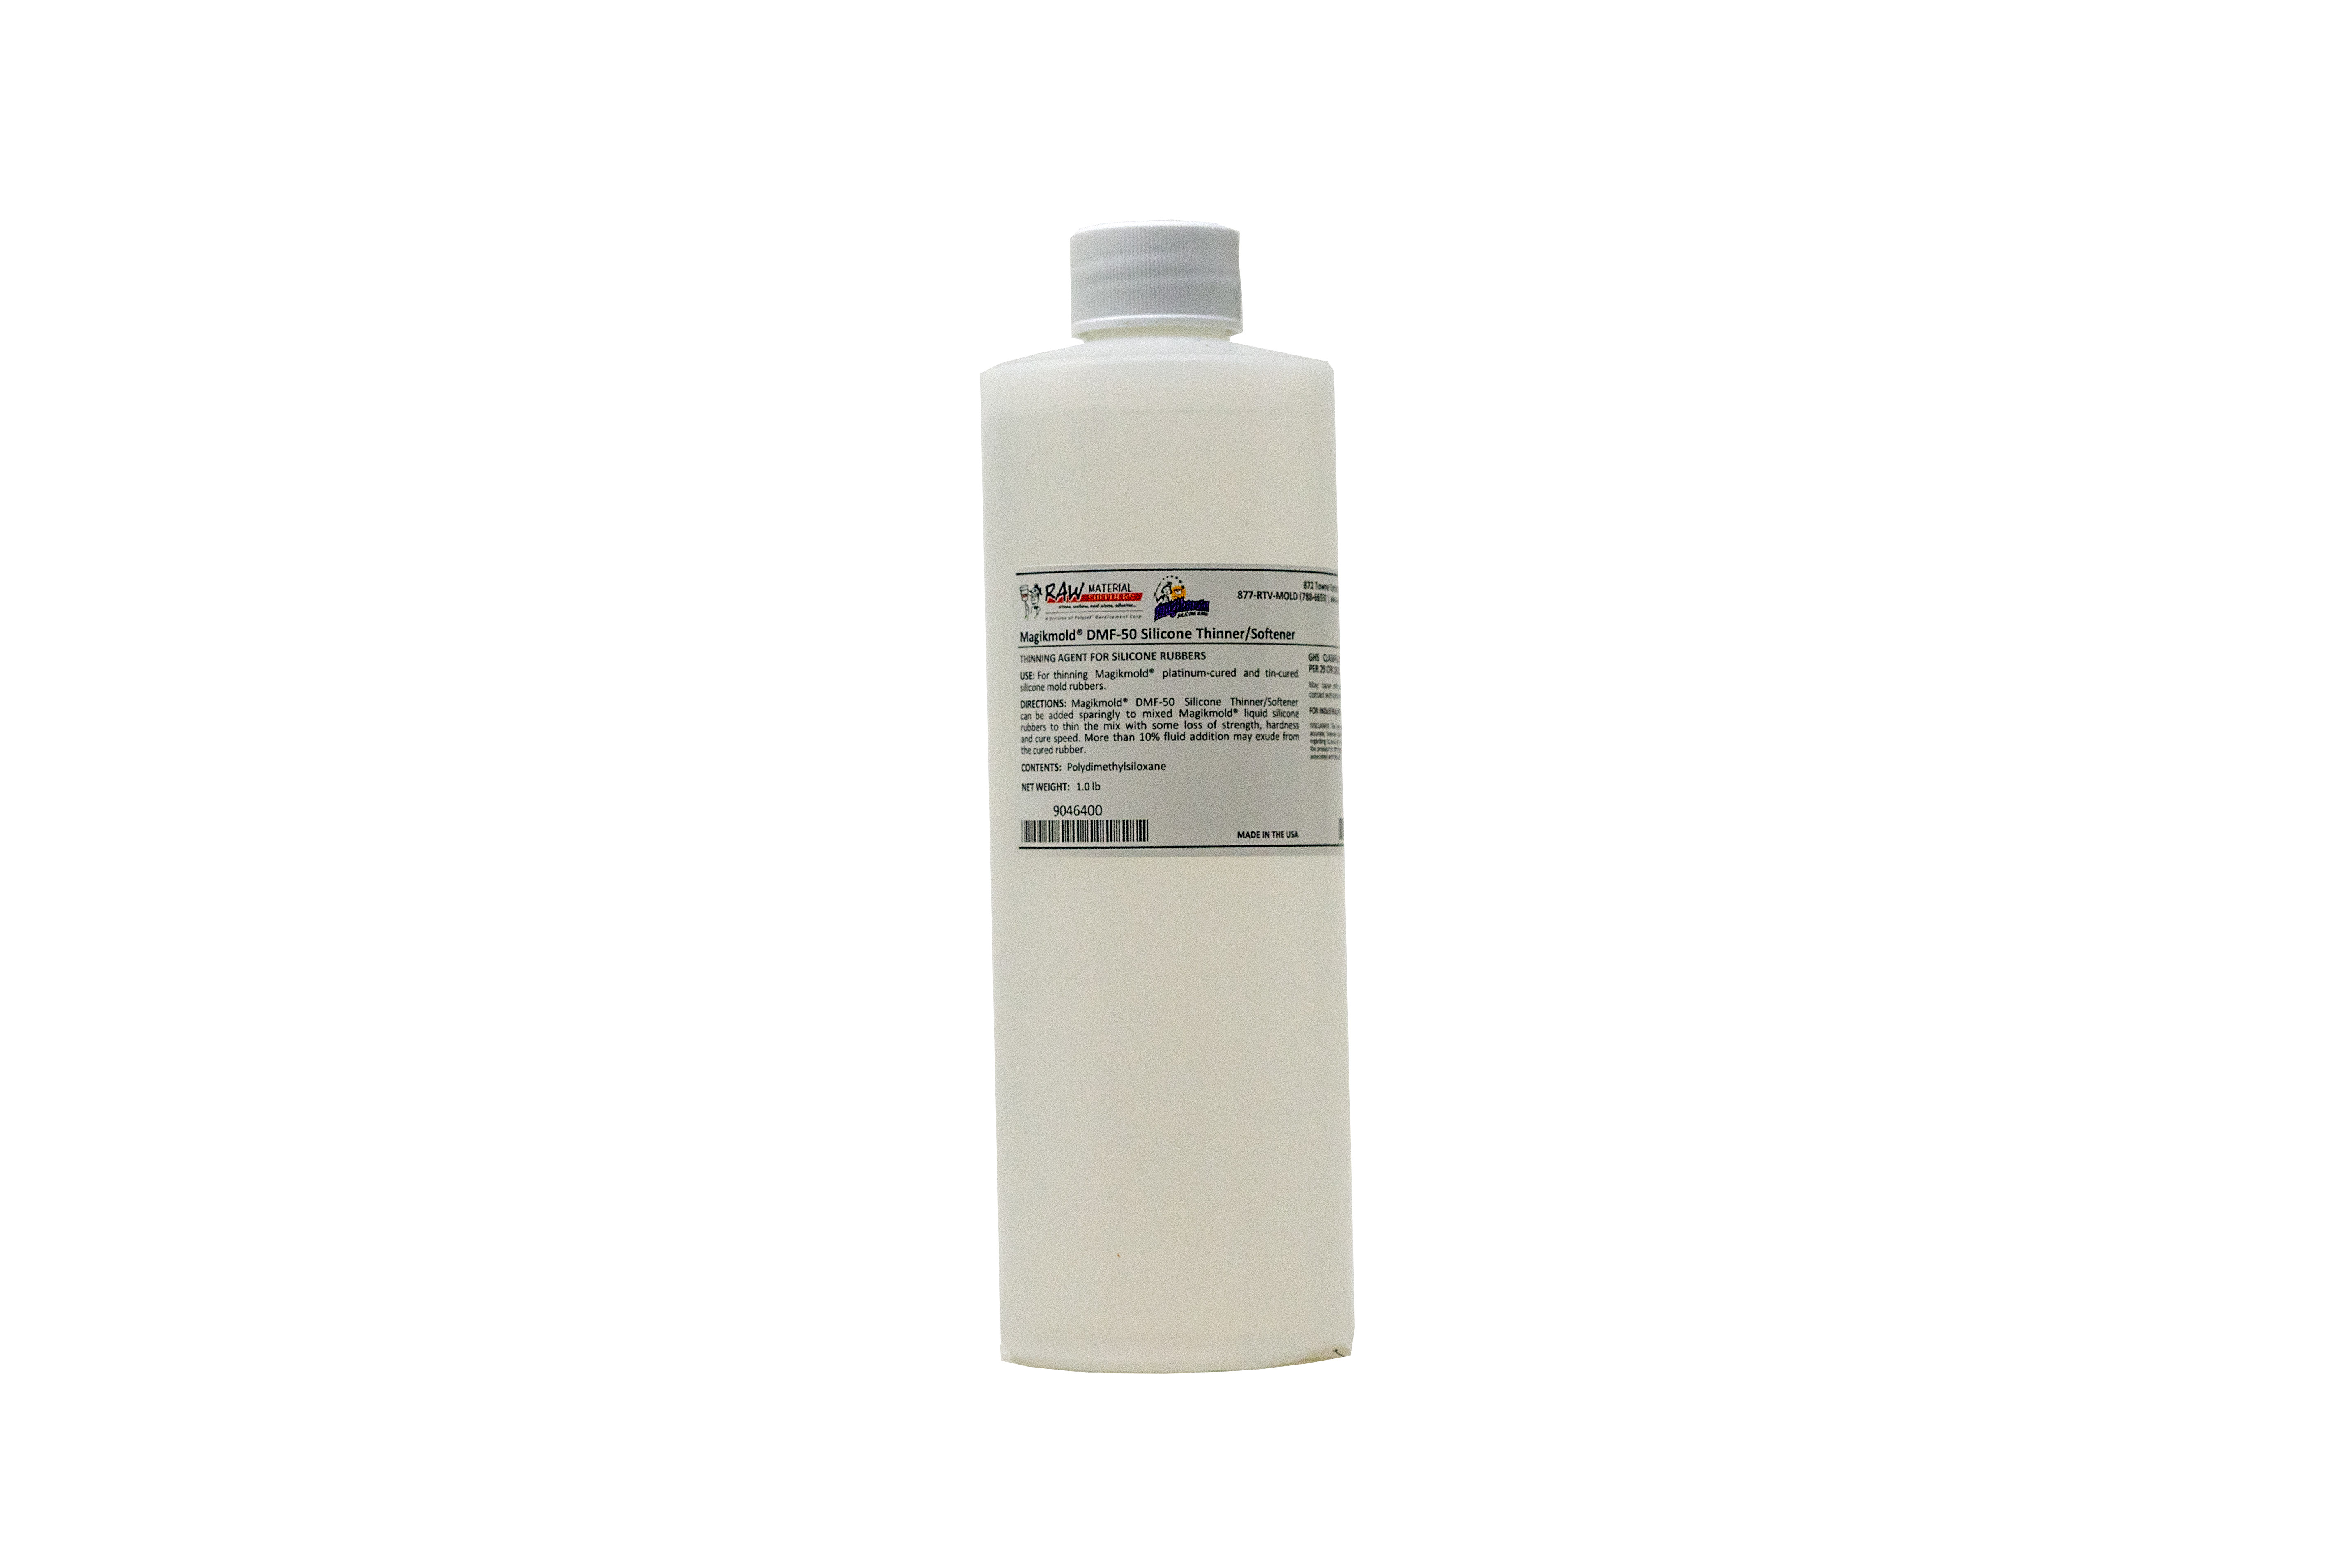 Magikmold® P-525 Platinum Cure Silicone Rubber - Raw Material